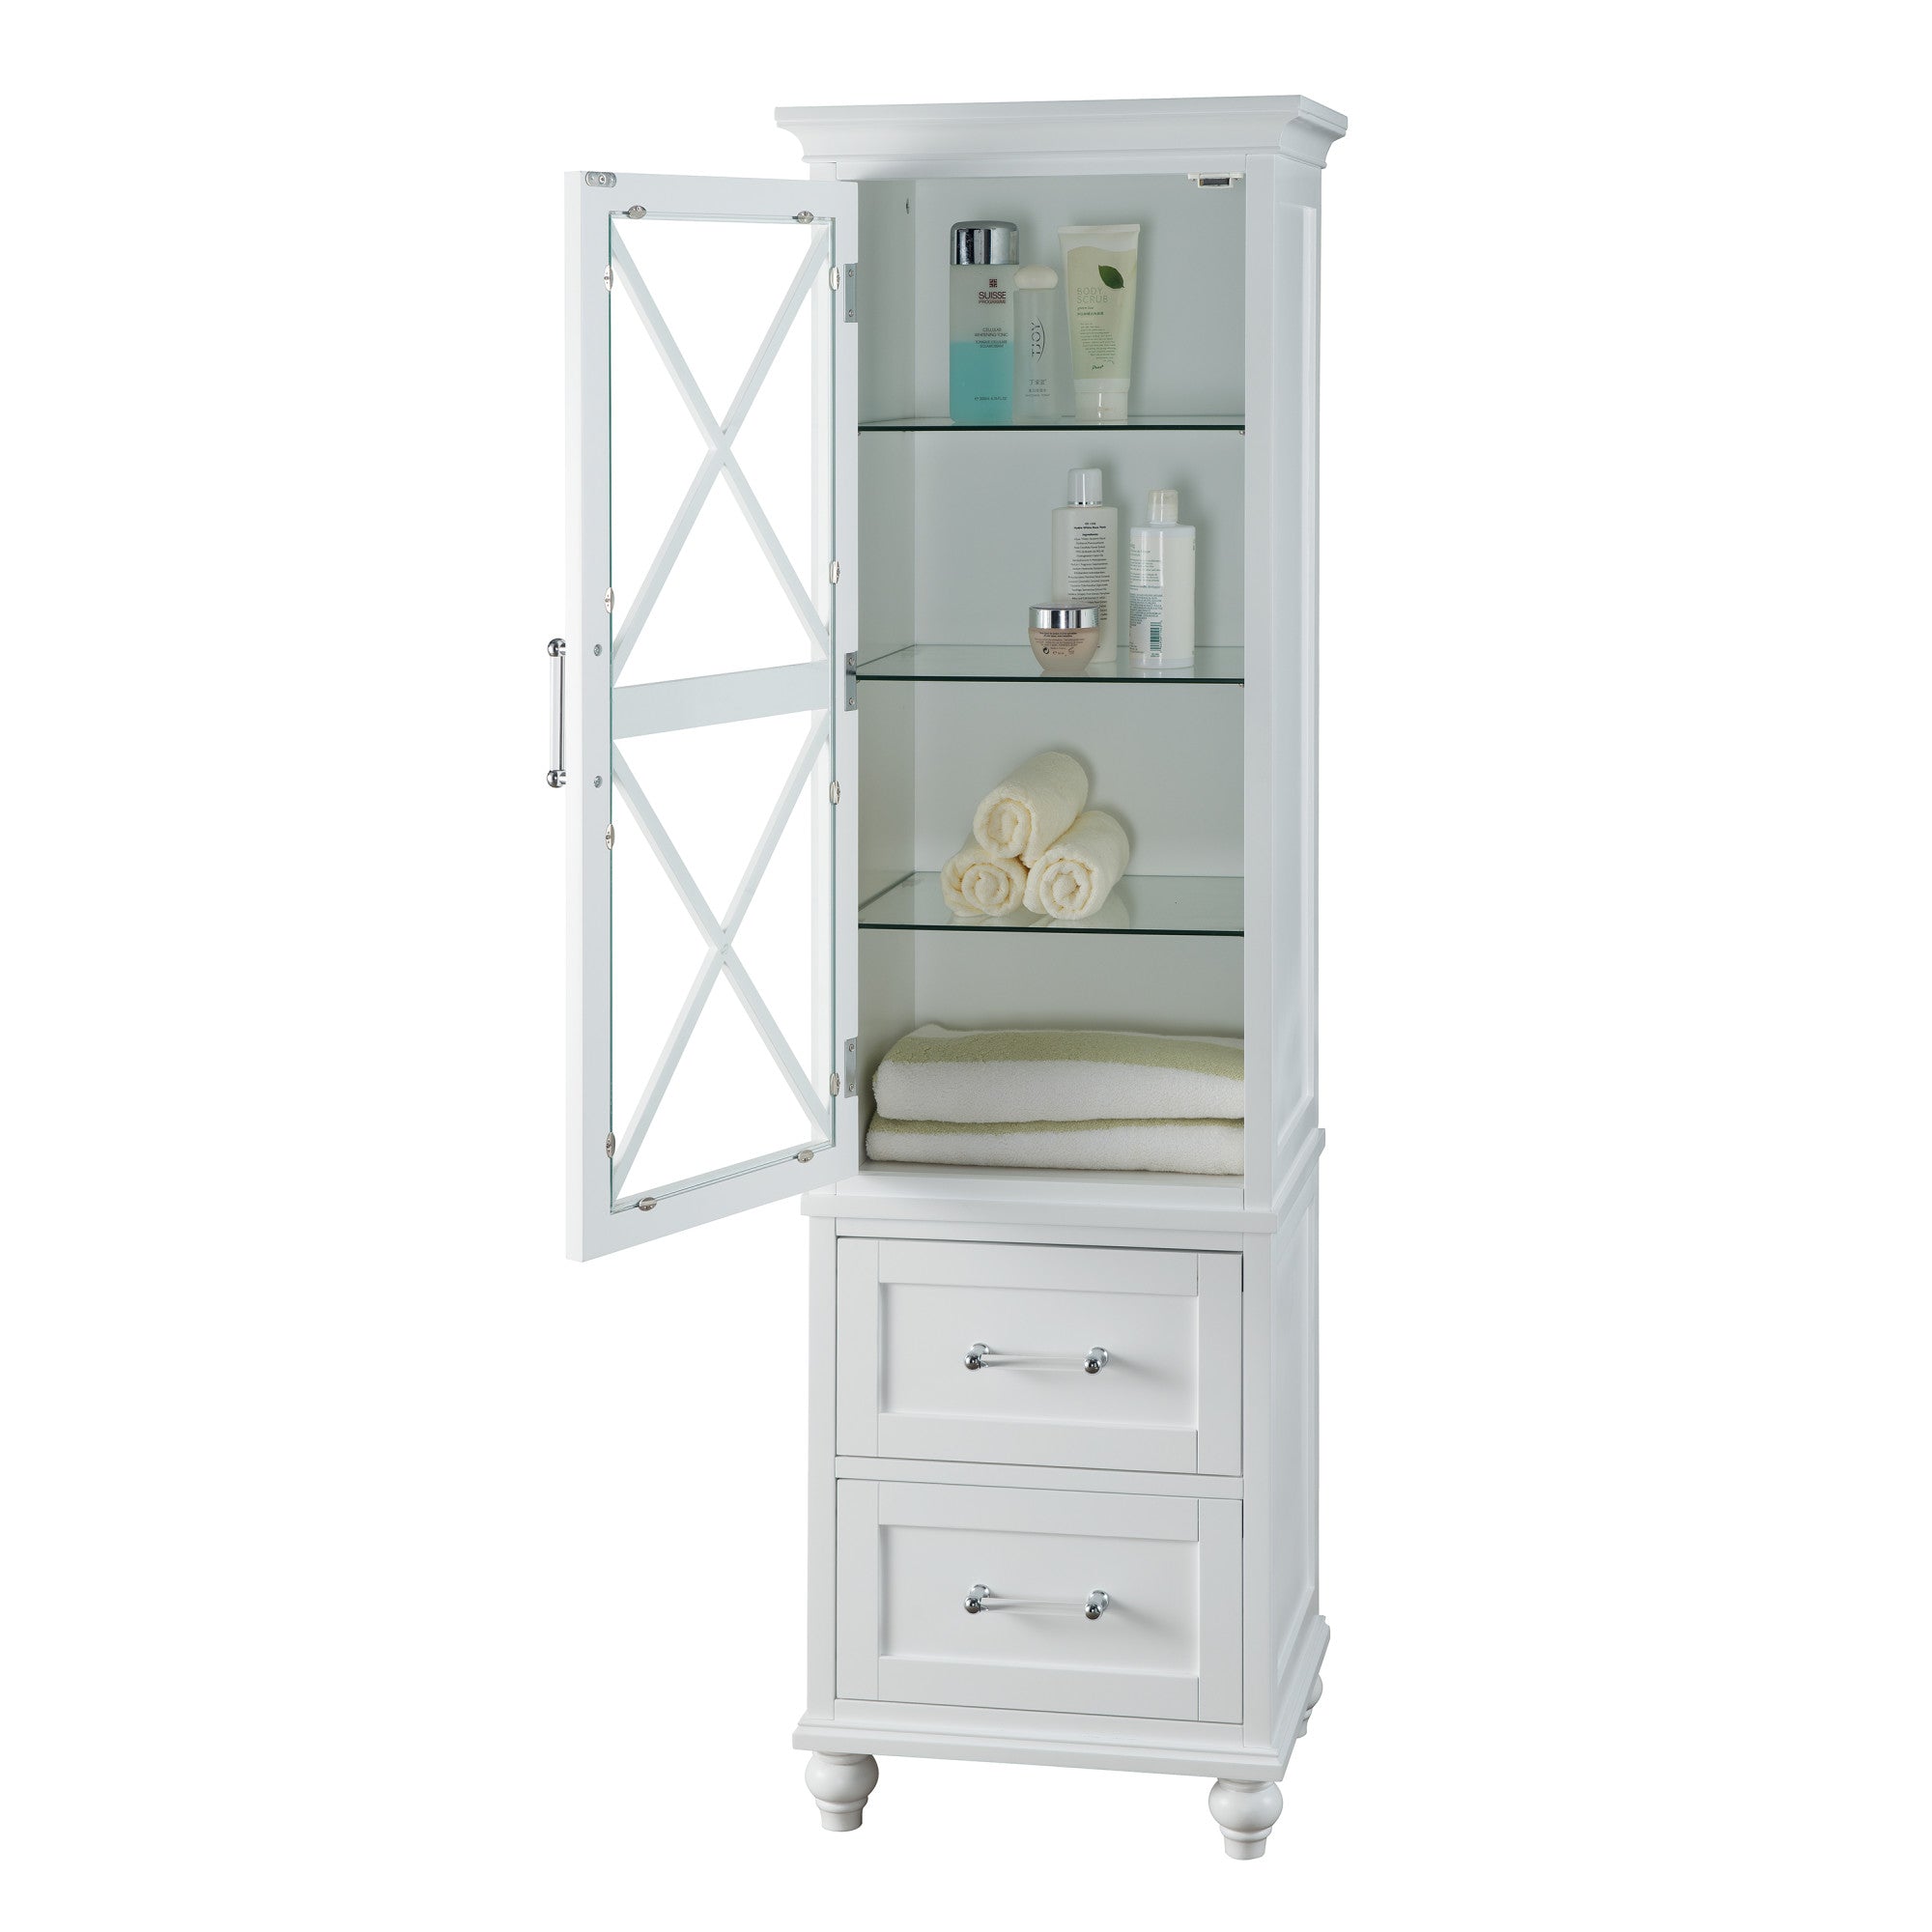 Teamson Home Blue Ridge Wooden Linen Tower Cabinet with Adjustable Shelves, White